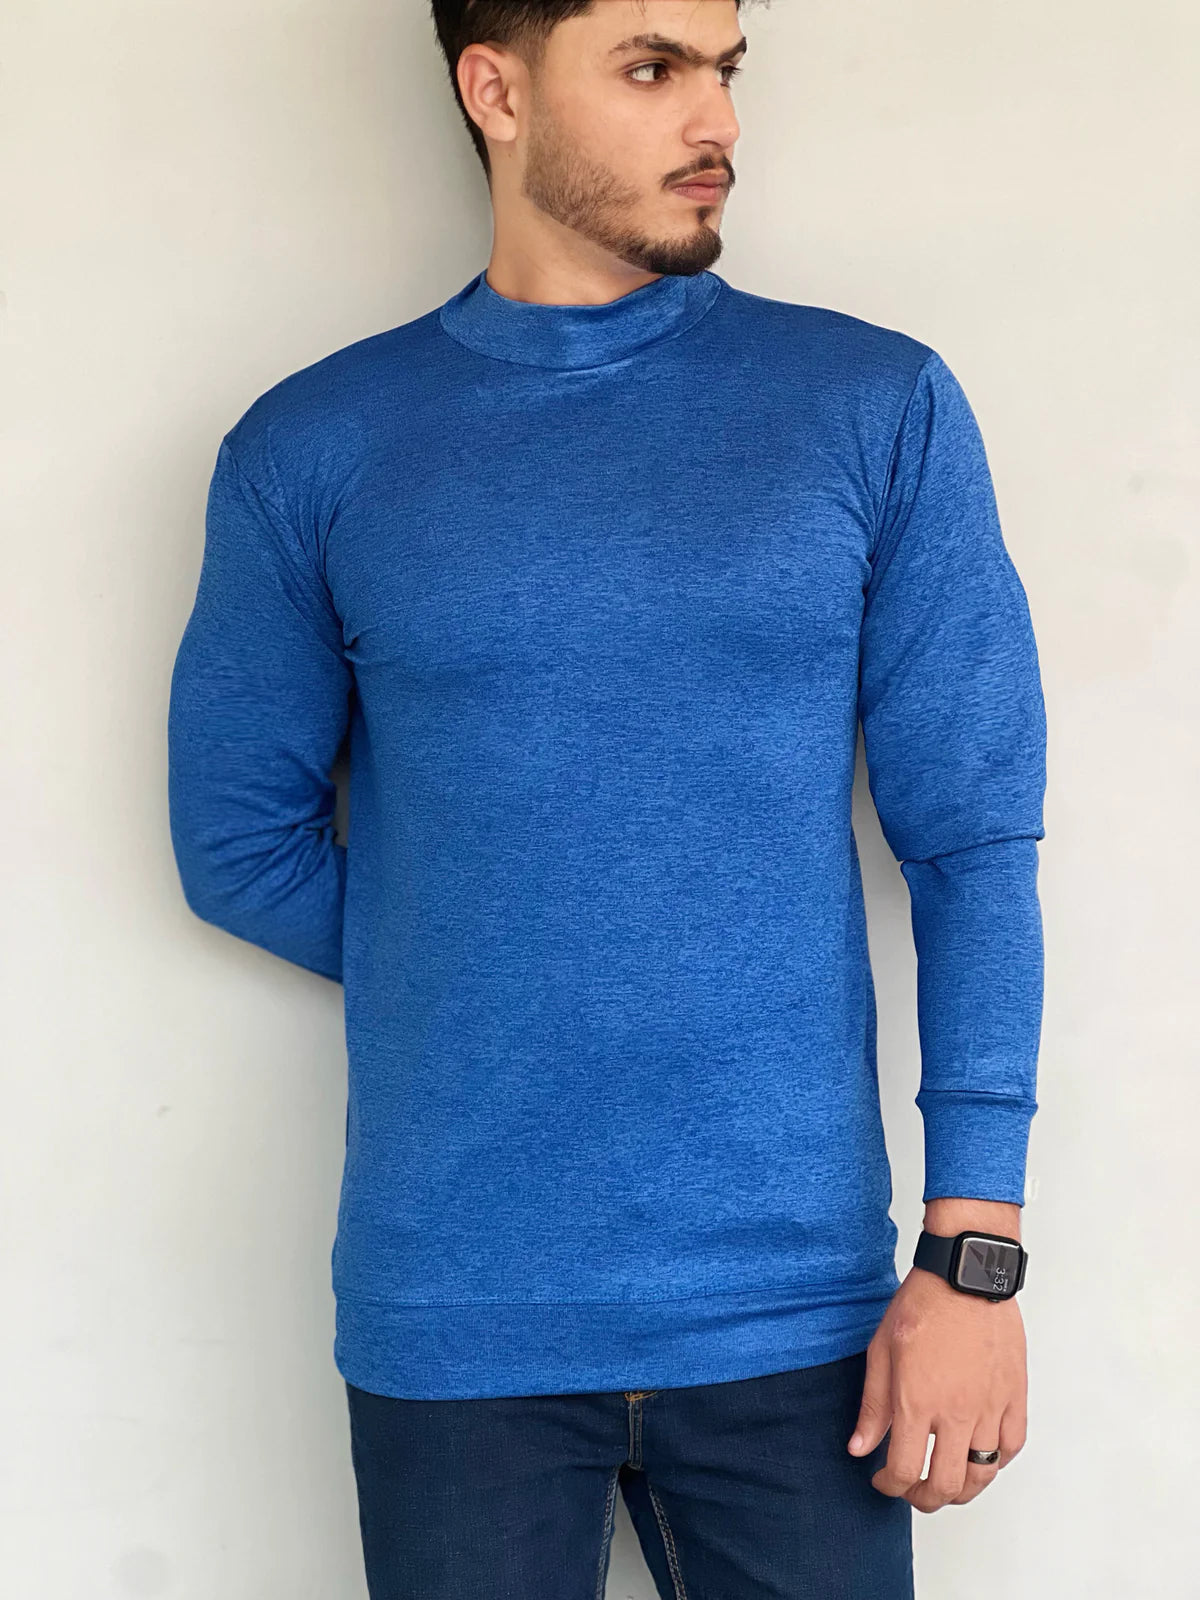 CREWNECK BLUE SWEATERS: YOUR STYLE STAPLE FOR COMFORT AND VERSATILITY-